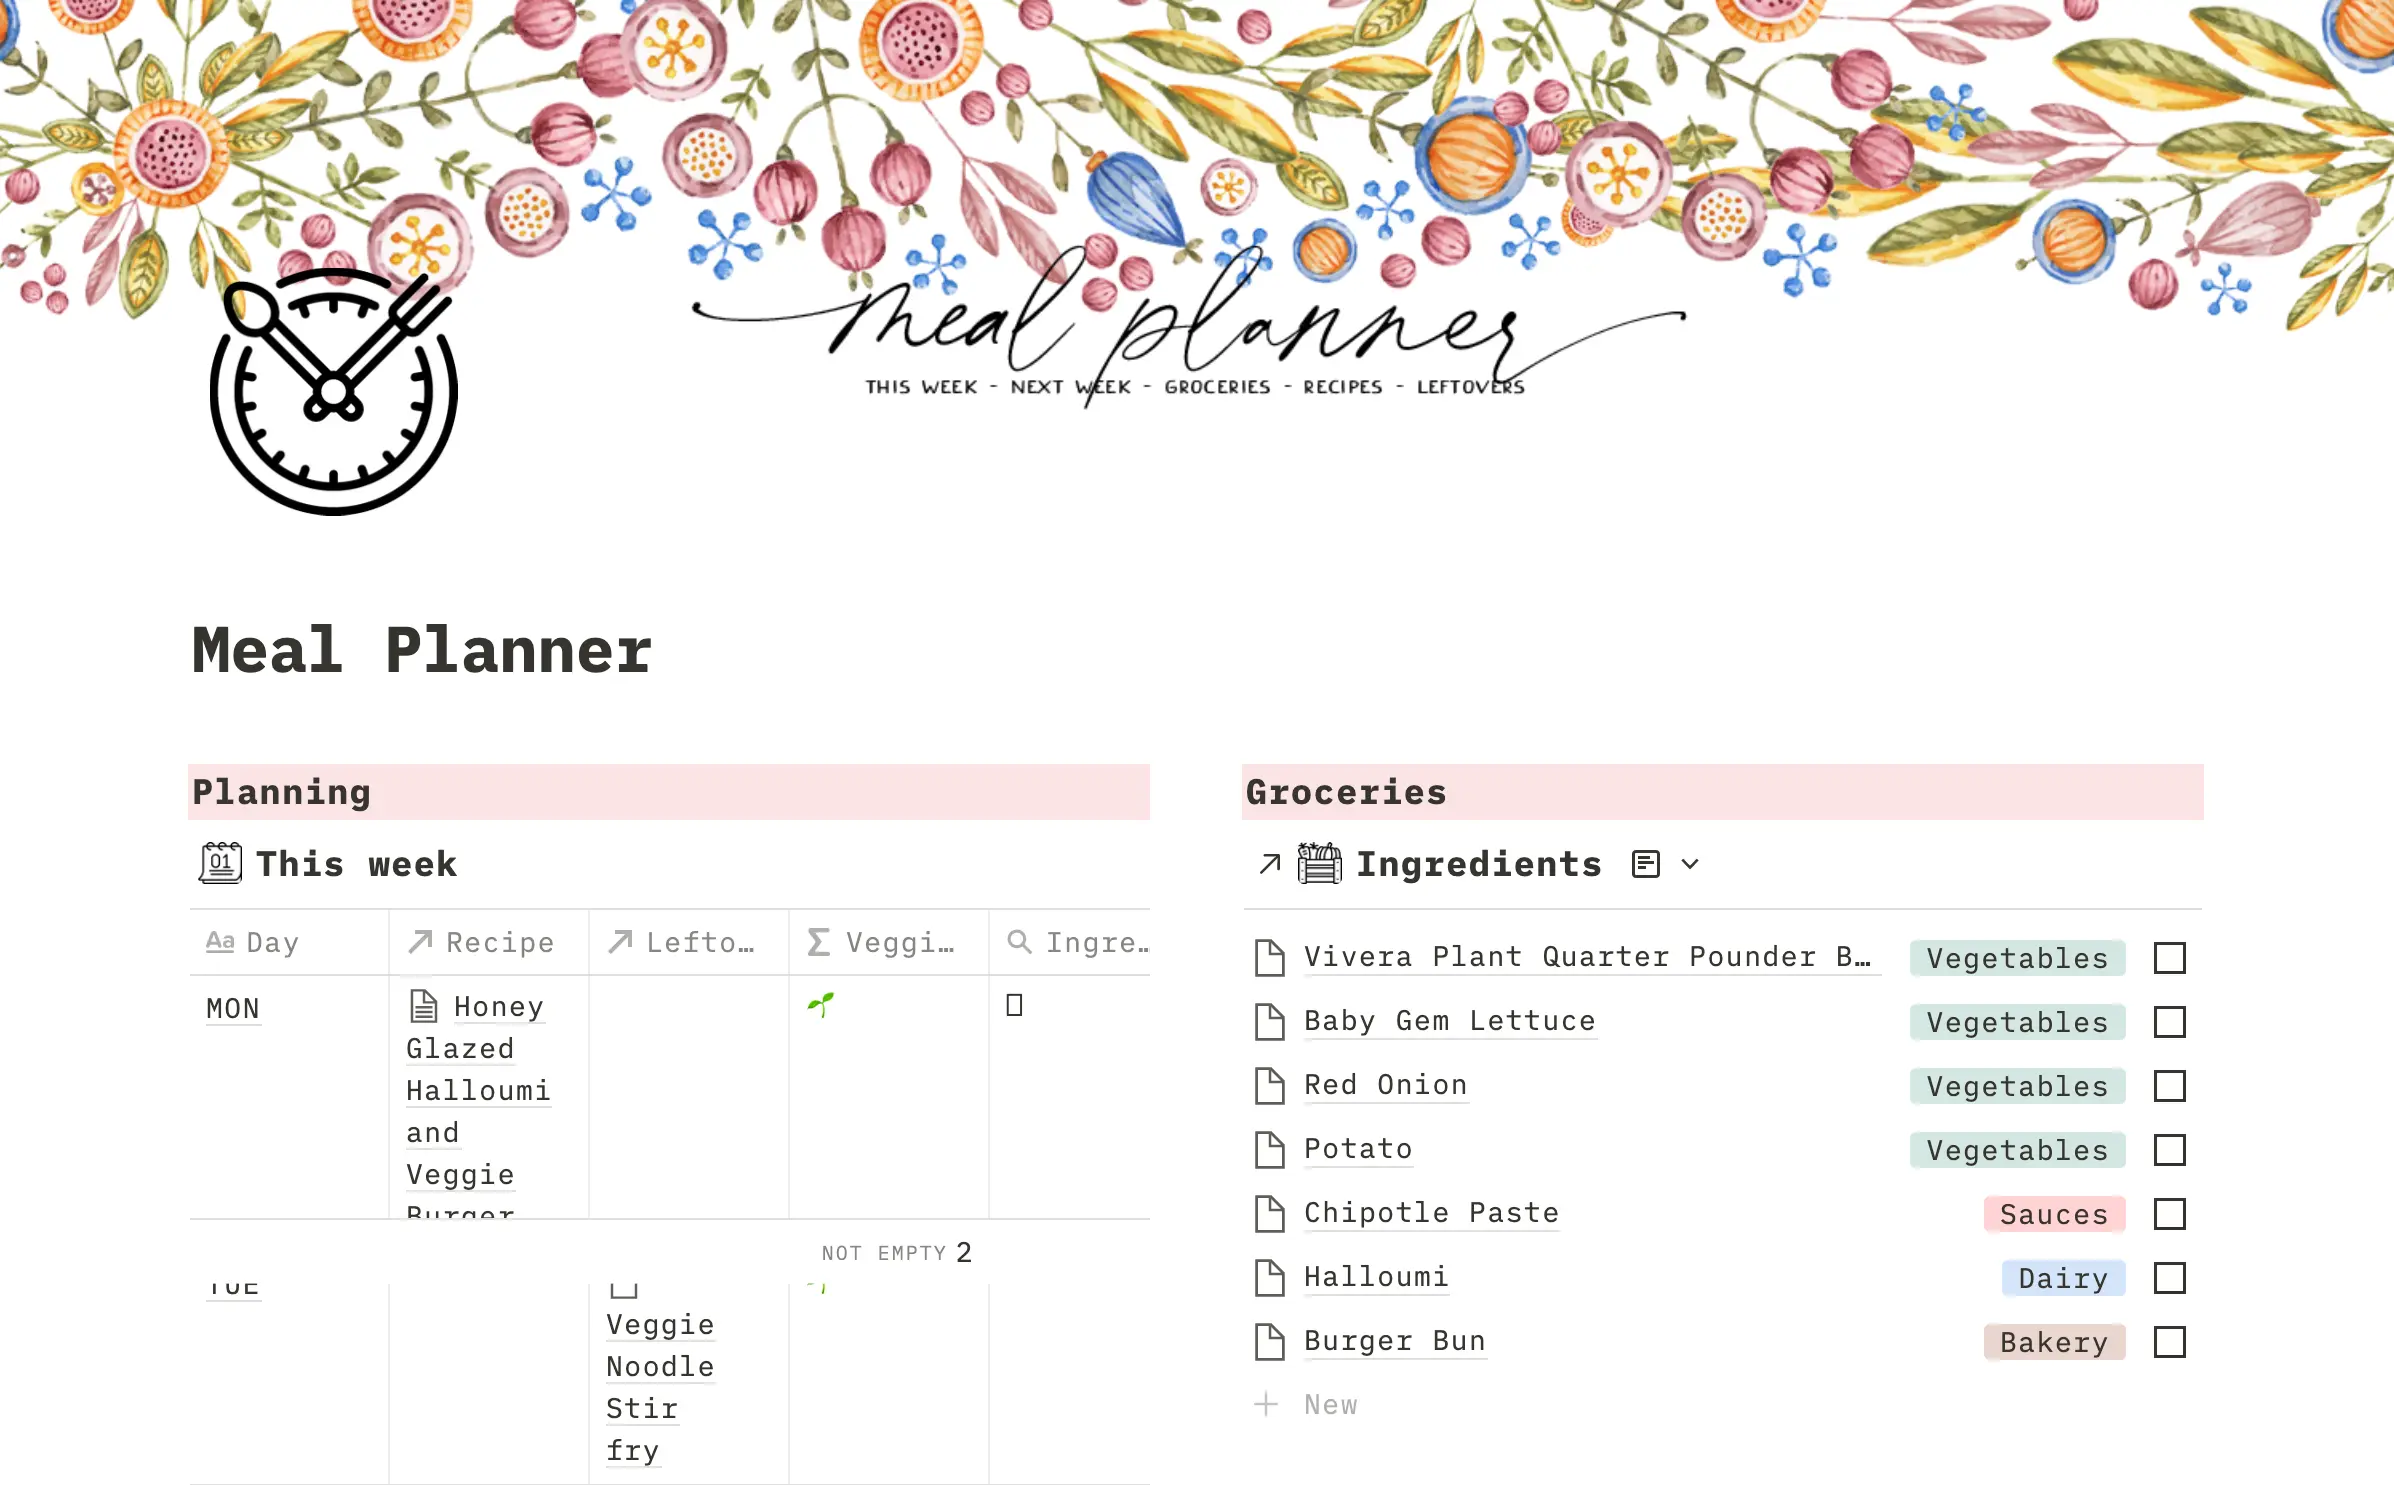 Meal Planner with Recipes image